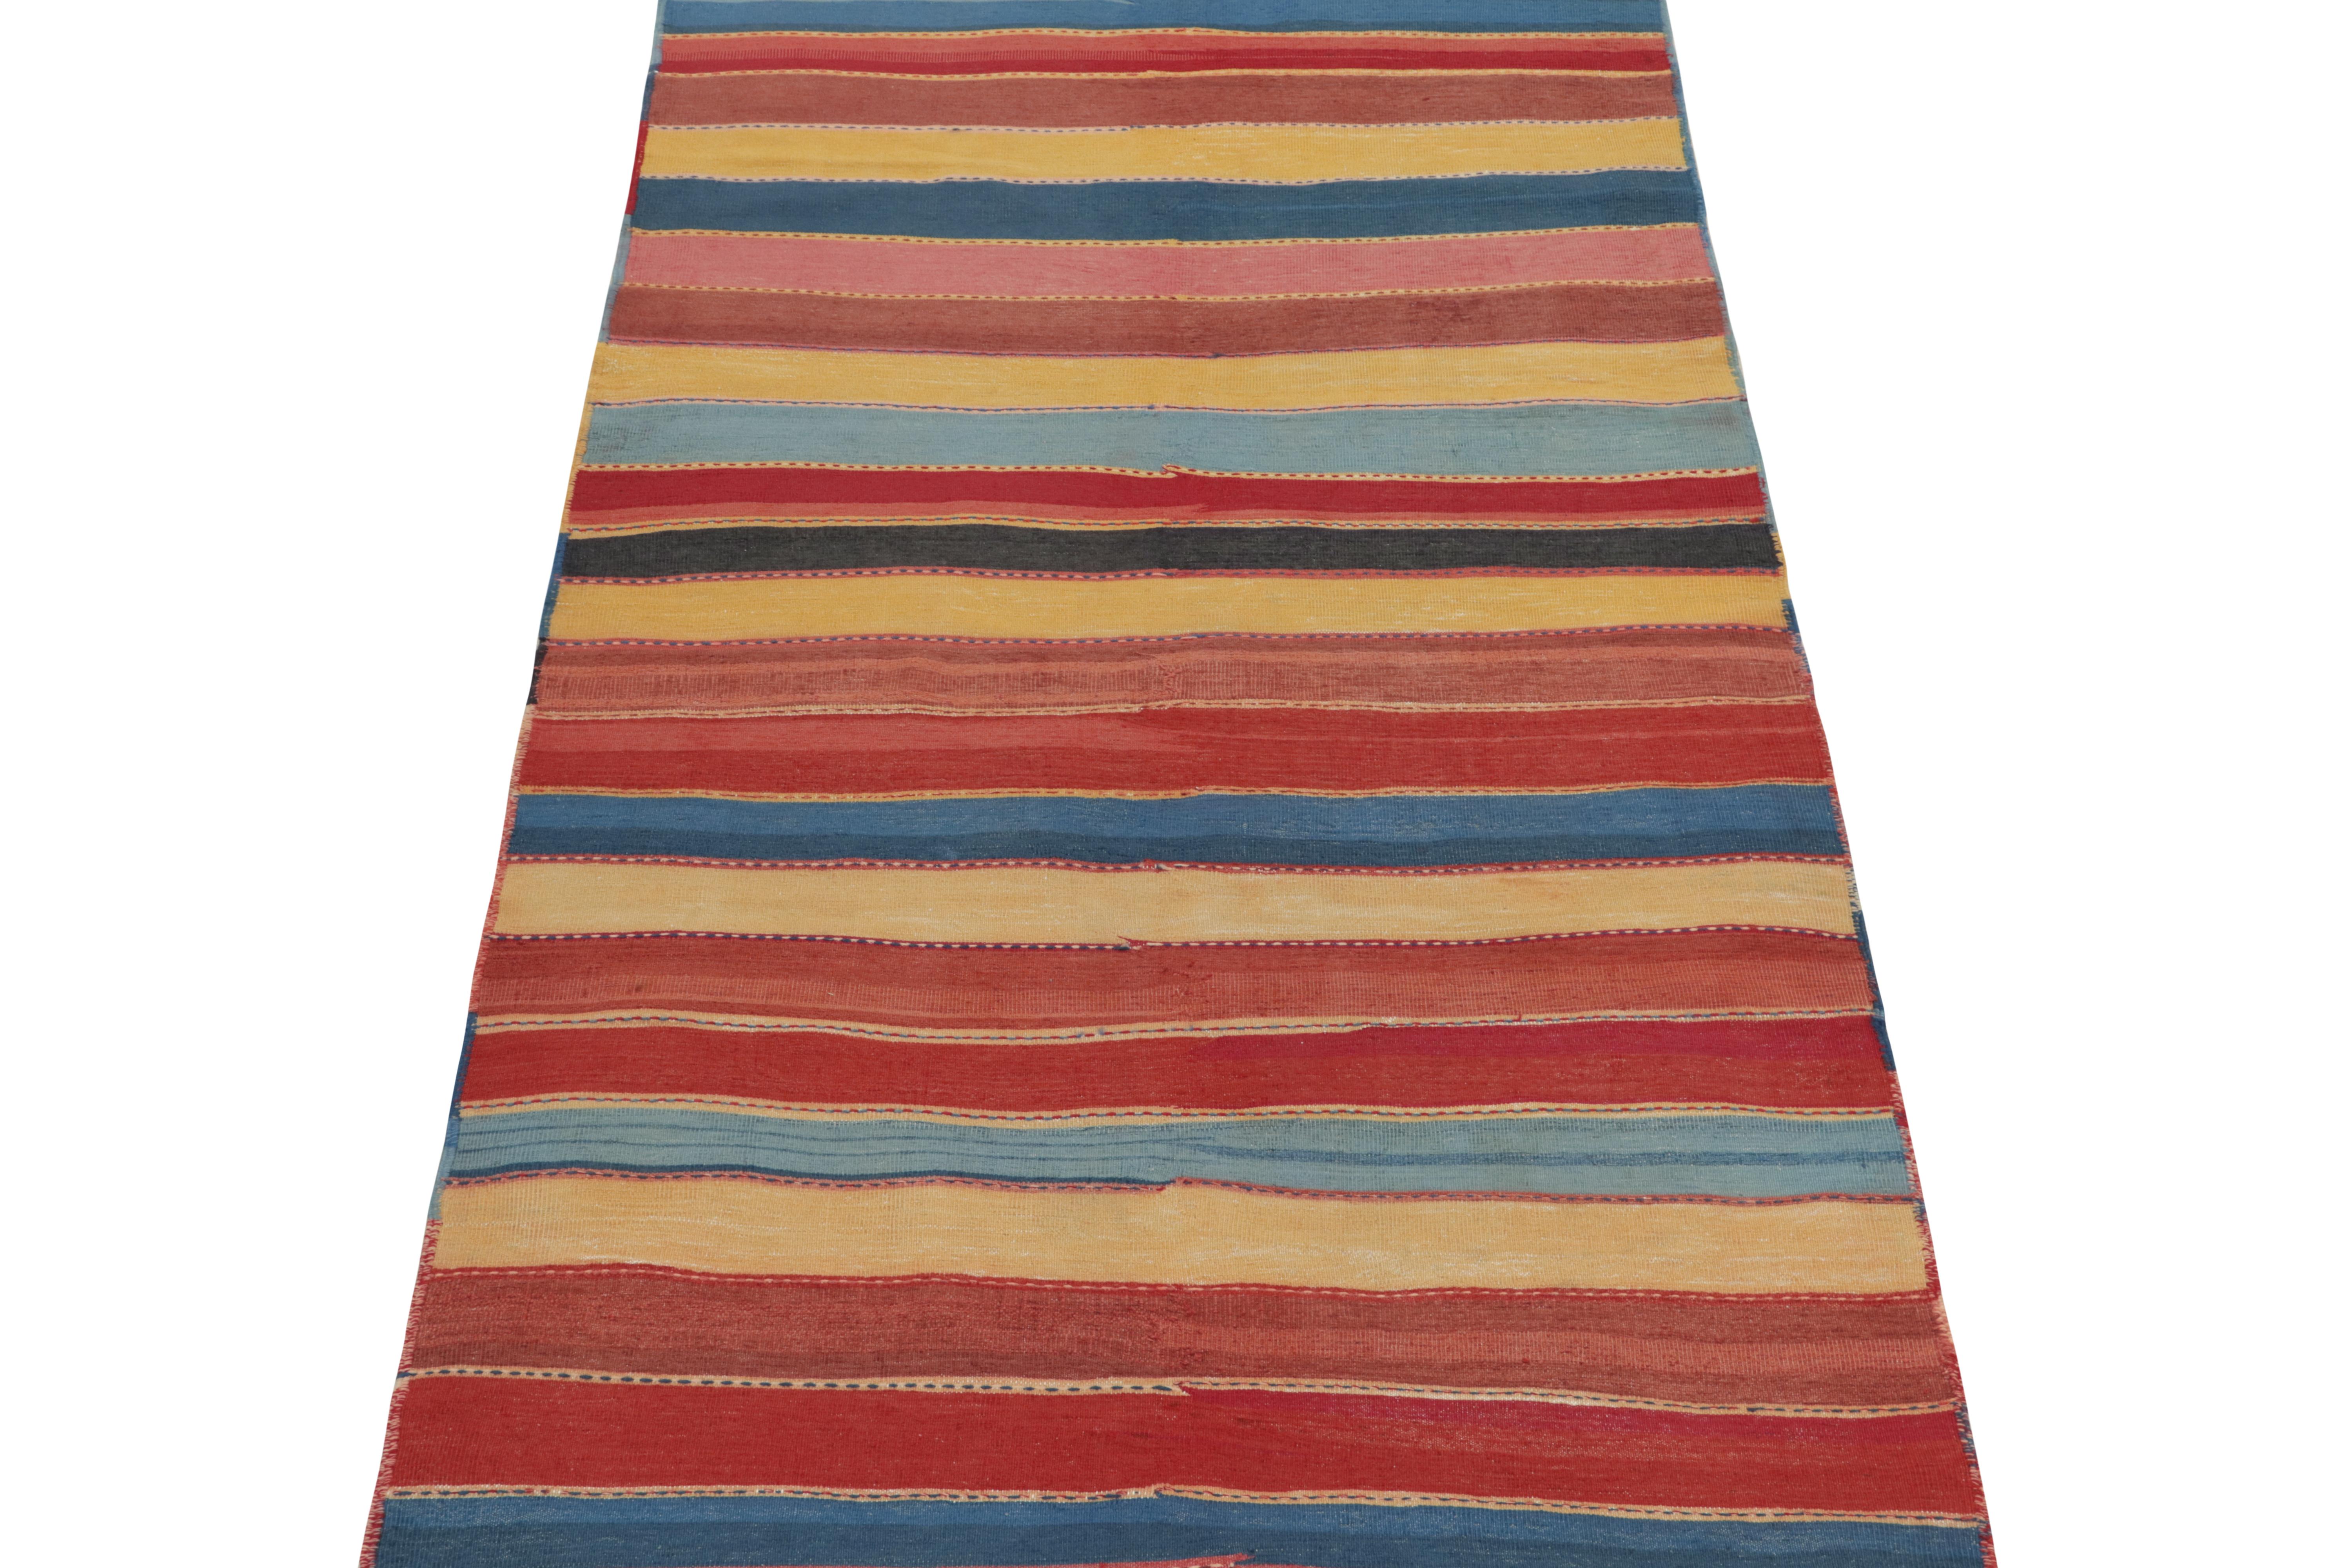 This vintage 5x10 Persian Kilim is a new addition of Bidjar provenance in Rug & Kilim's rare tribal curations. Handwoven in wool circa 1950-1960.

Further on the Design: 

Bidjar Kilims like this are reputed for their durability and distinct nomadic